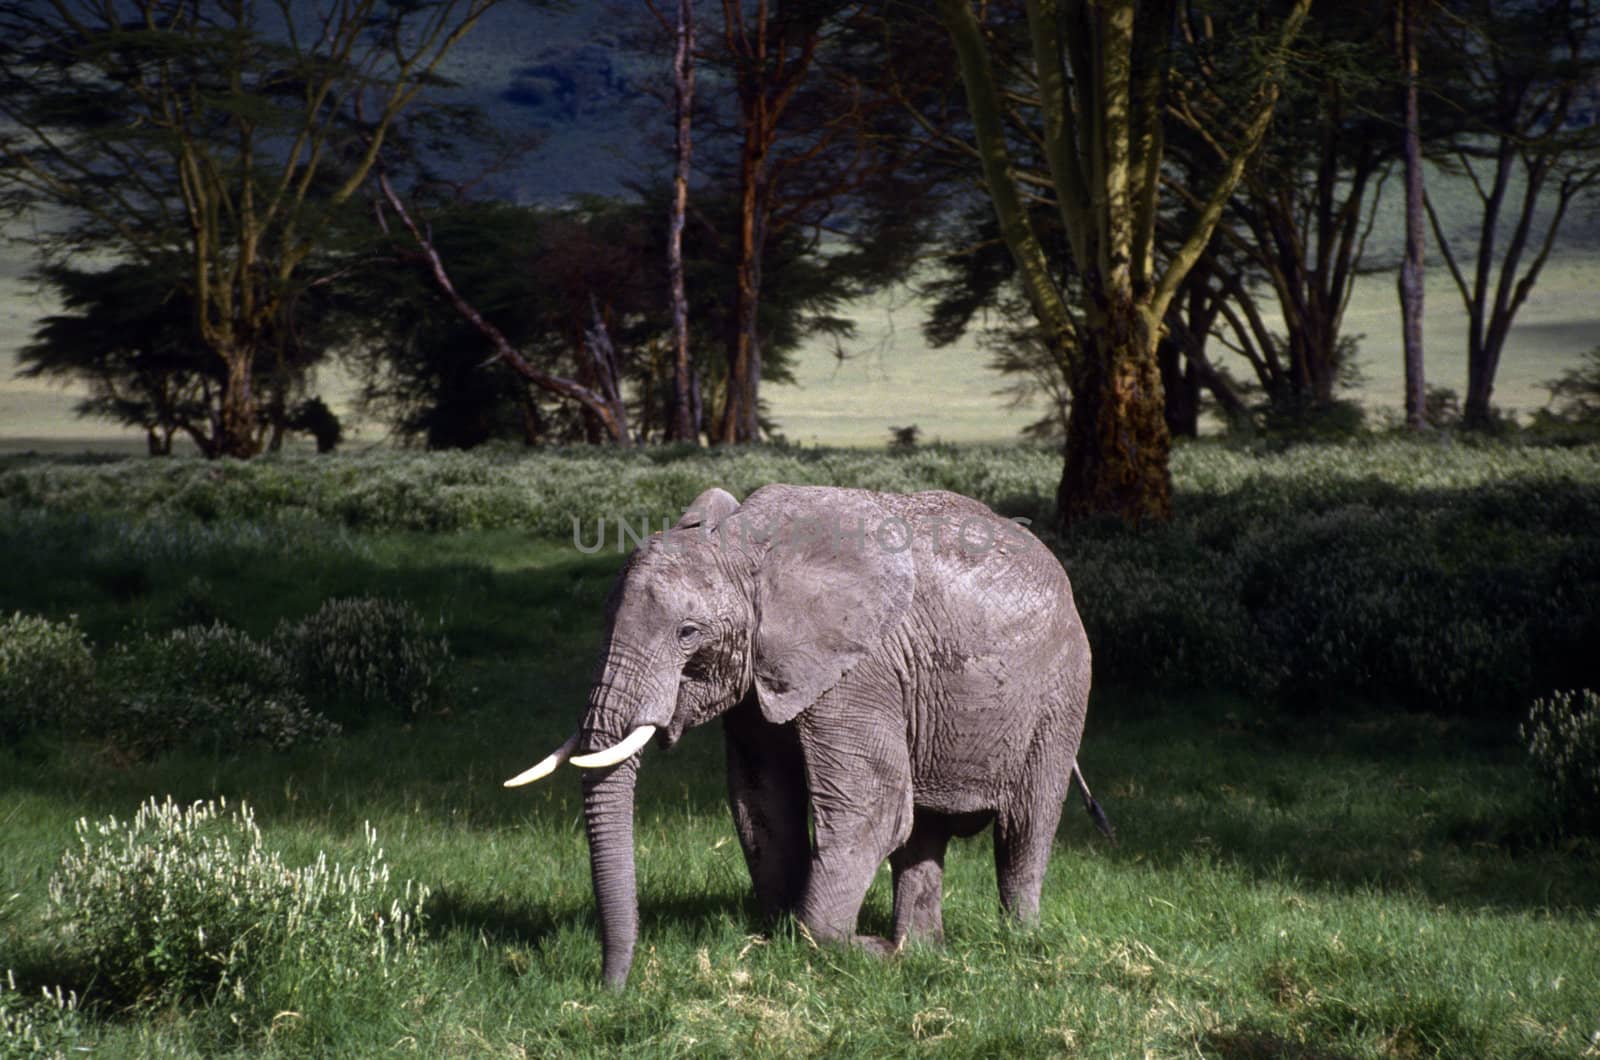 Adult elephant on the plain standing on the grass.